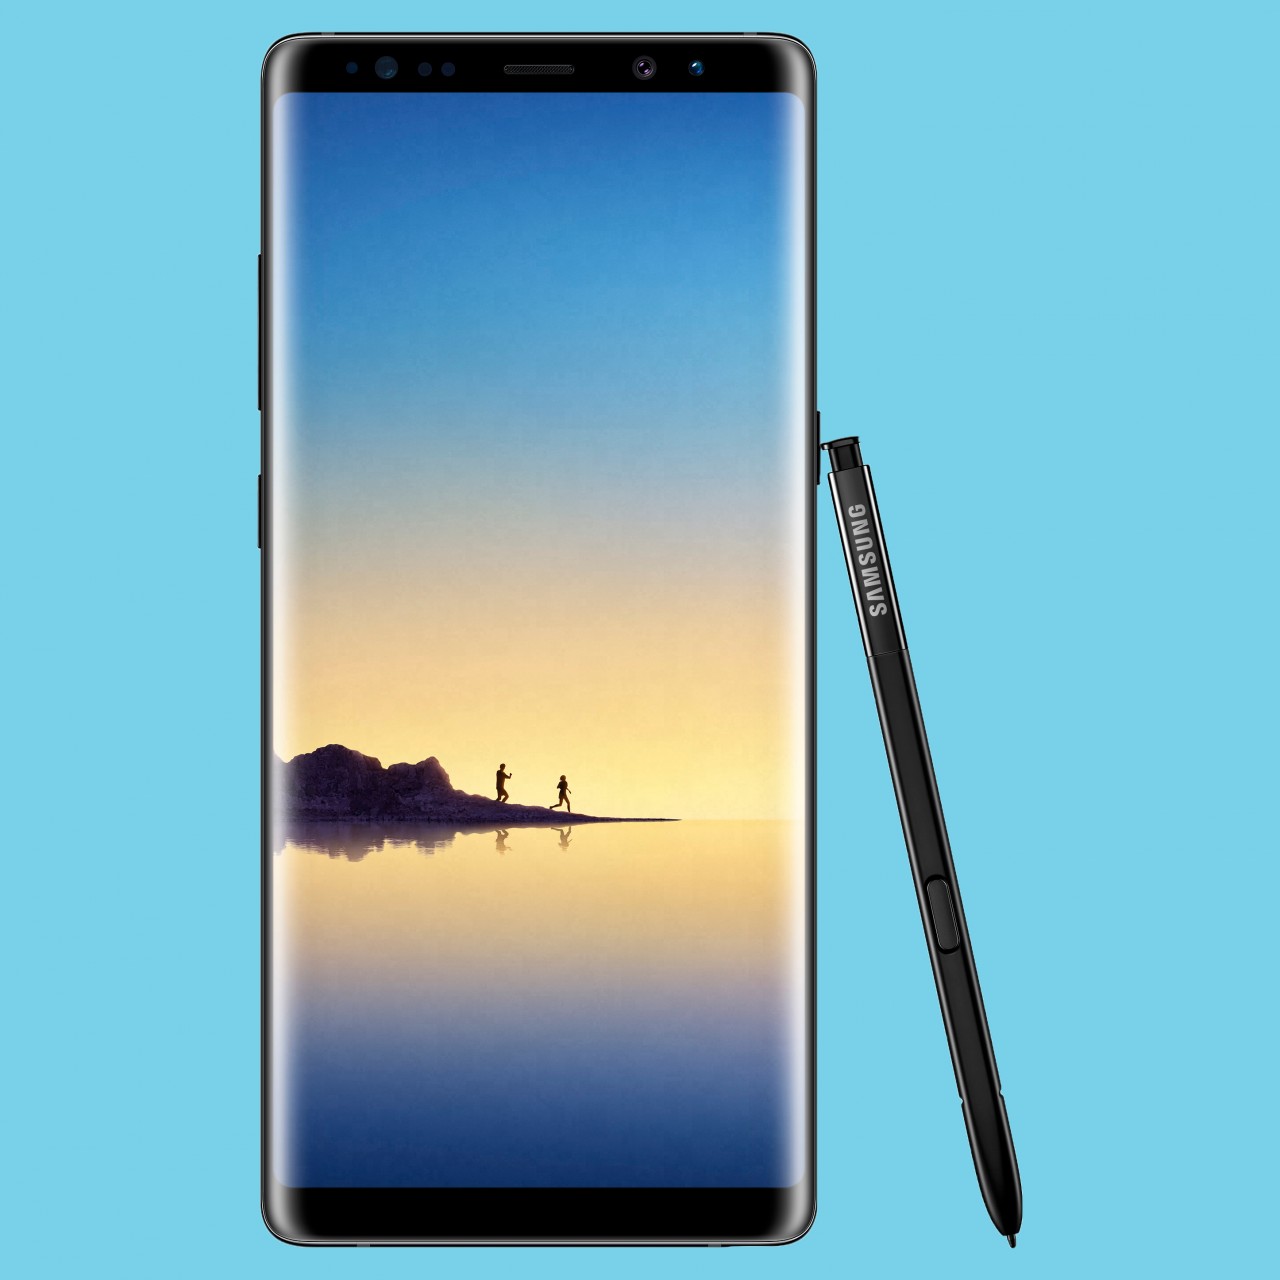 Samsung Note 8 - Ram 6GB - Rom 64GB - Front Camera 24MP - 6.3 inches - 3300mAh Battery